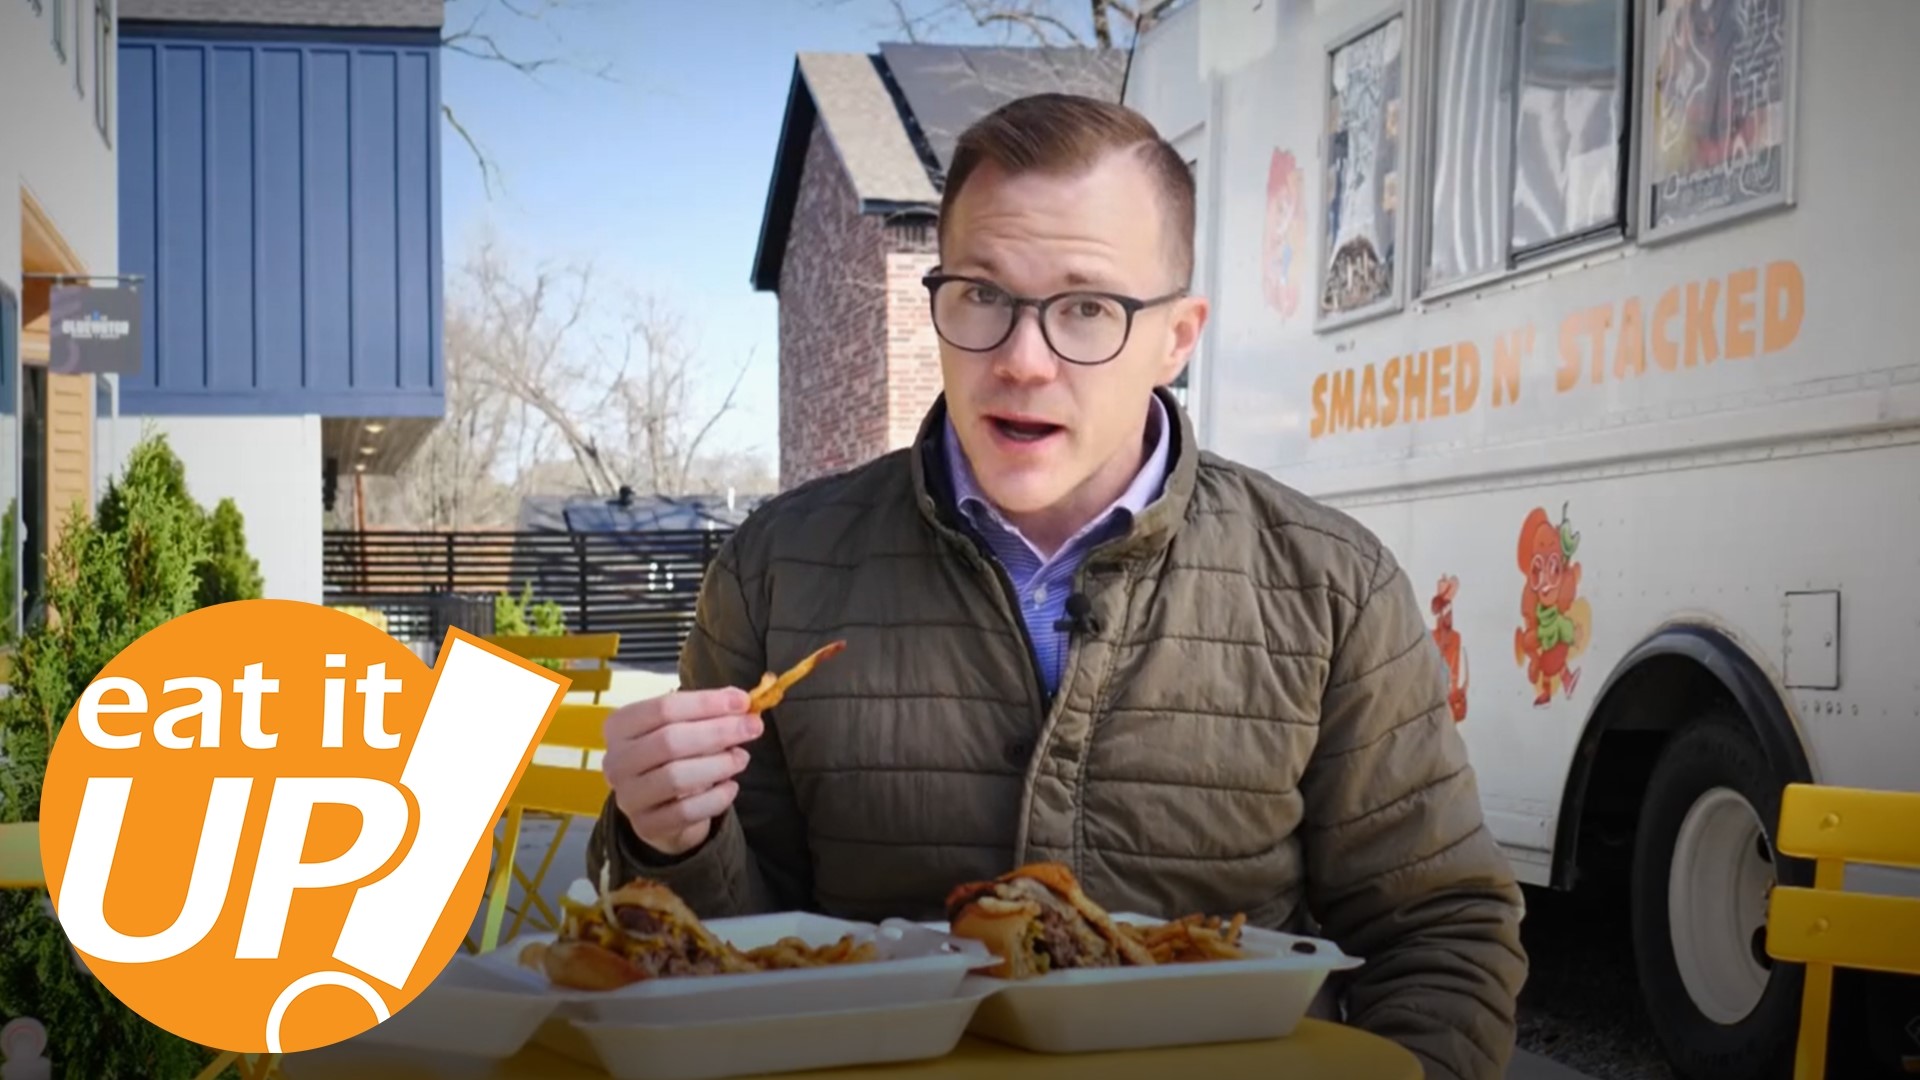 On this episode of Eat It Up, Skot Covert visits Smashed N' Stacked, a food truck in Little Rock's Pettaway Square known for its delicious food & community values.